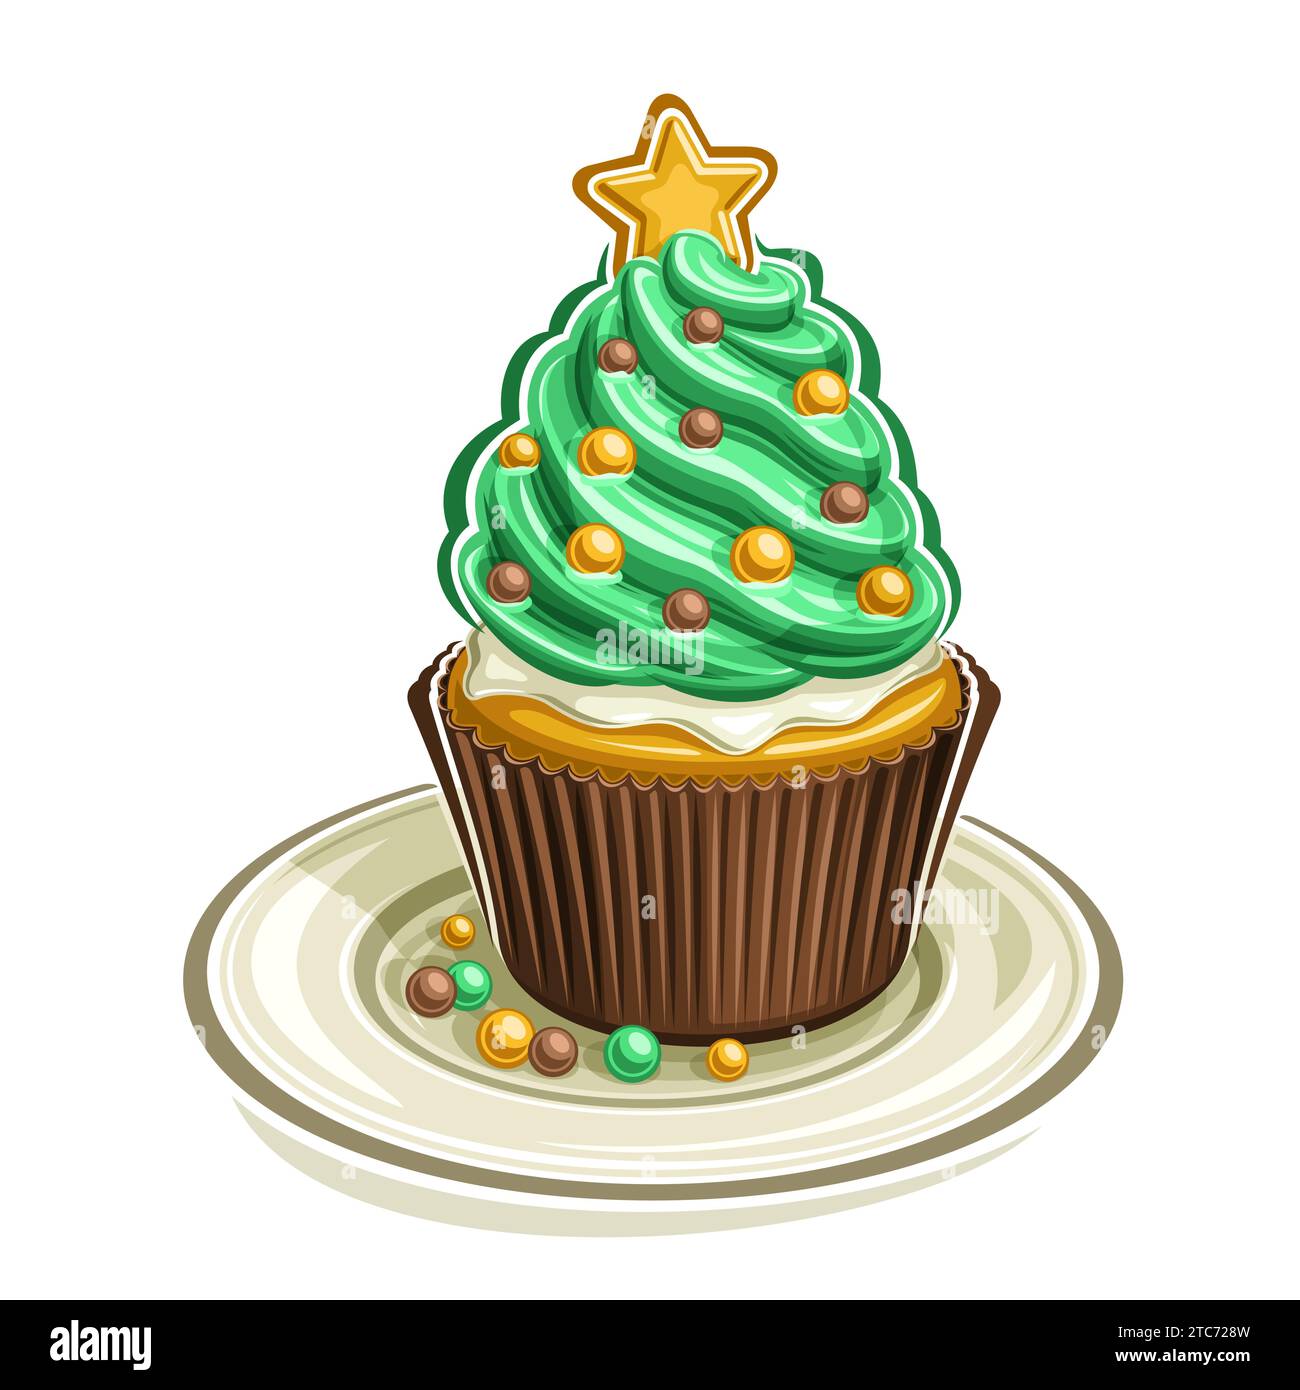 Vector logo for Christmas Cupcake, square poster with illustration of homemade cupcake in brown suit with twisted cream, decorated gold christmas ball Stock Vector